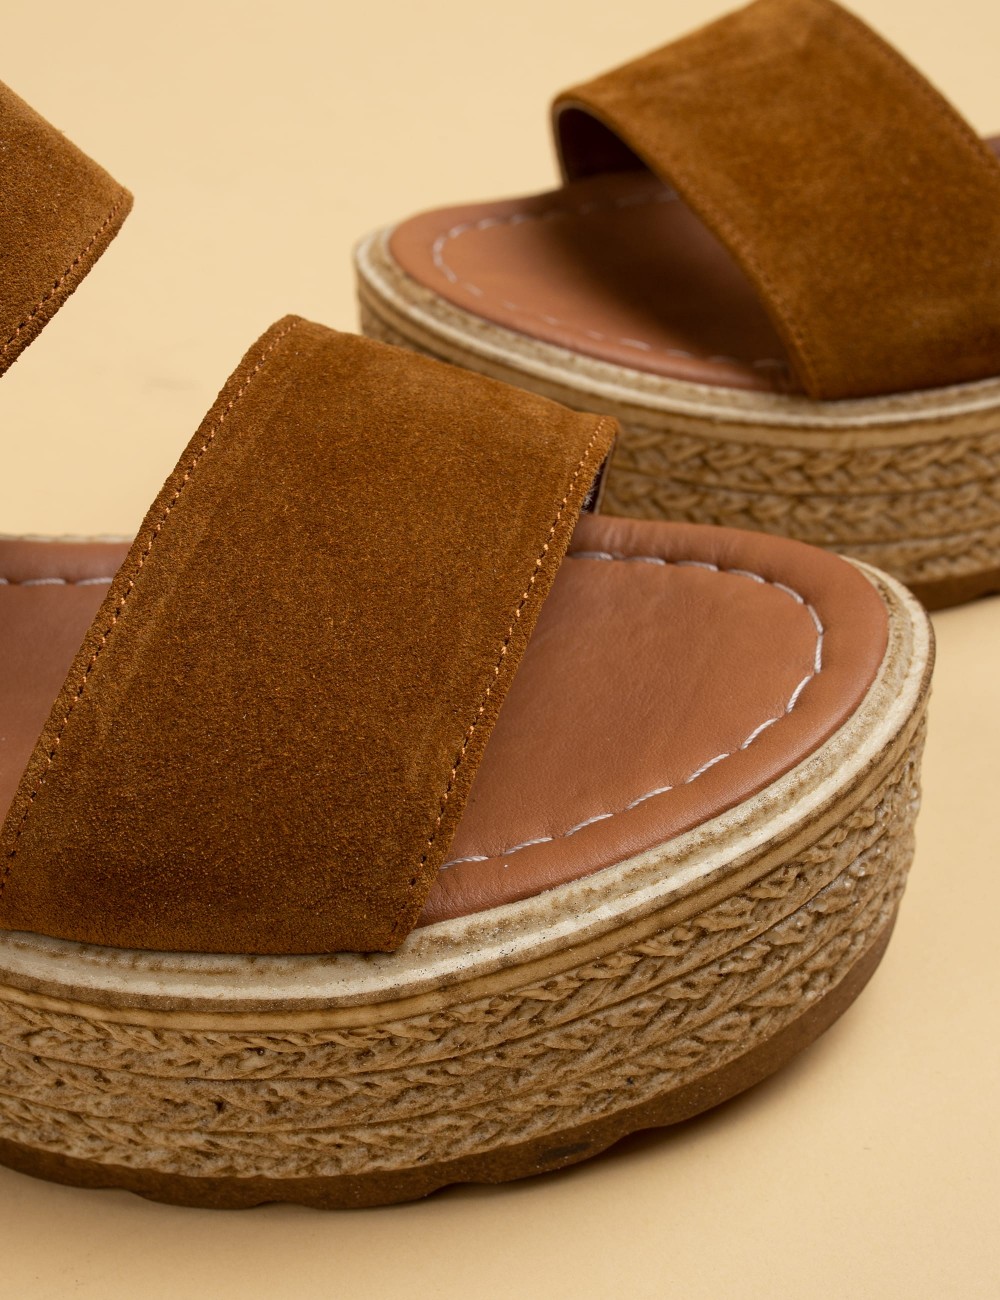 Tan Suede Leather Sandals - B0405ZTBAP01